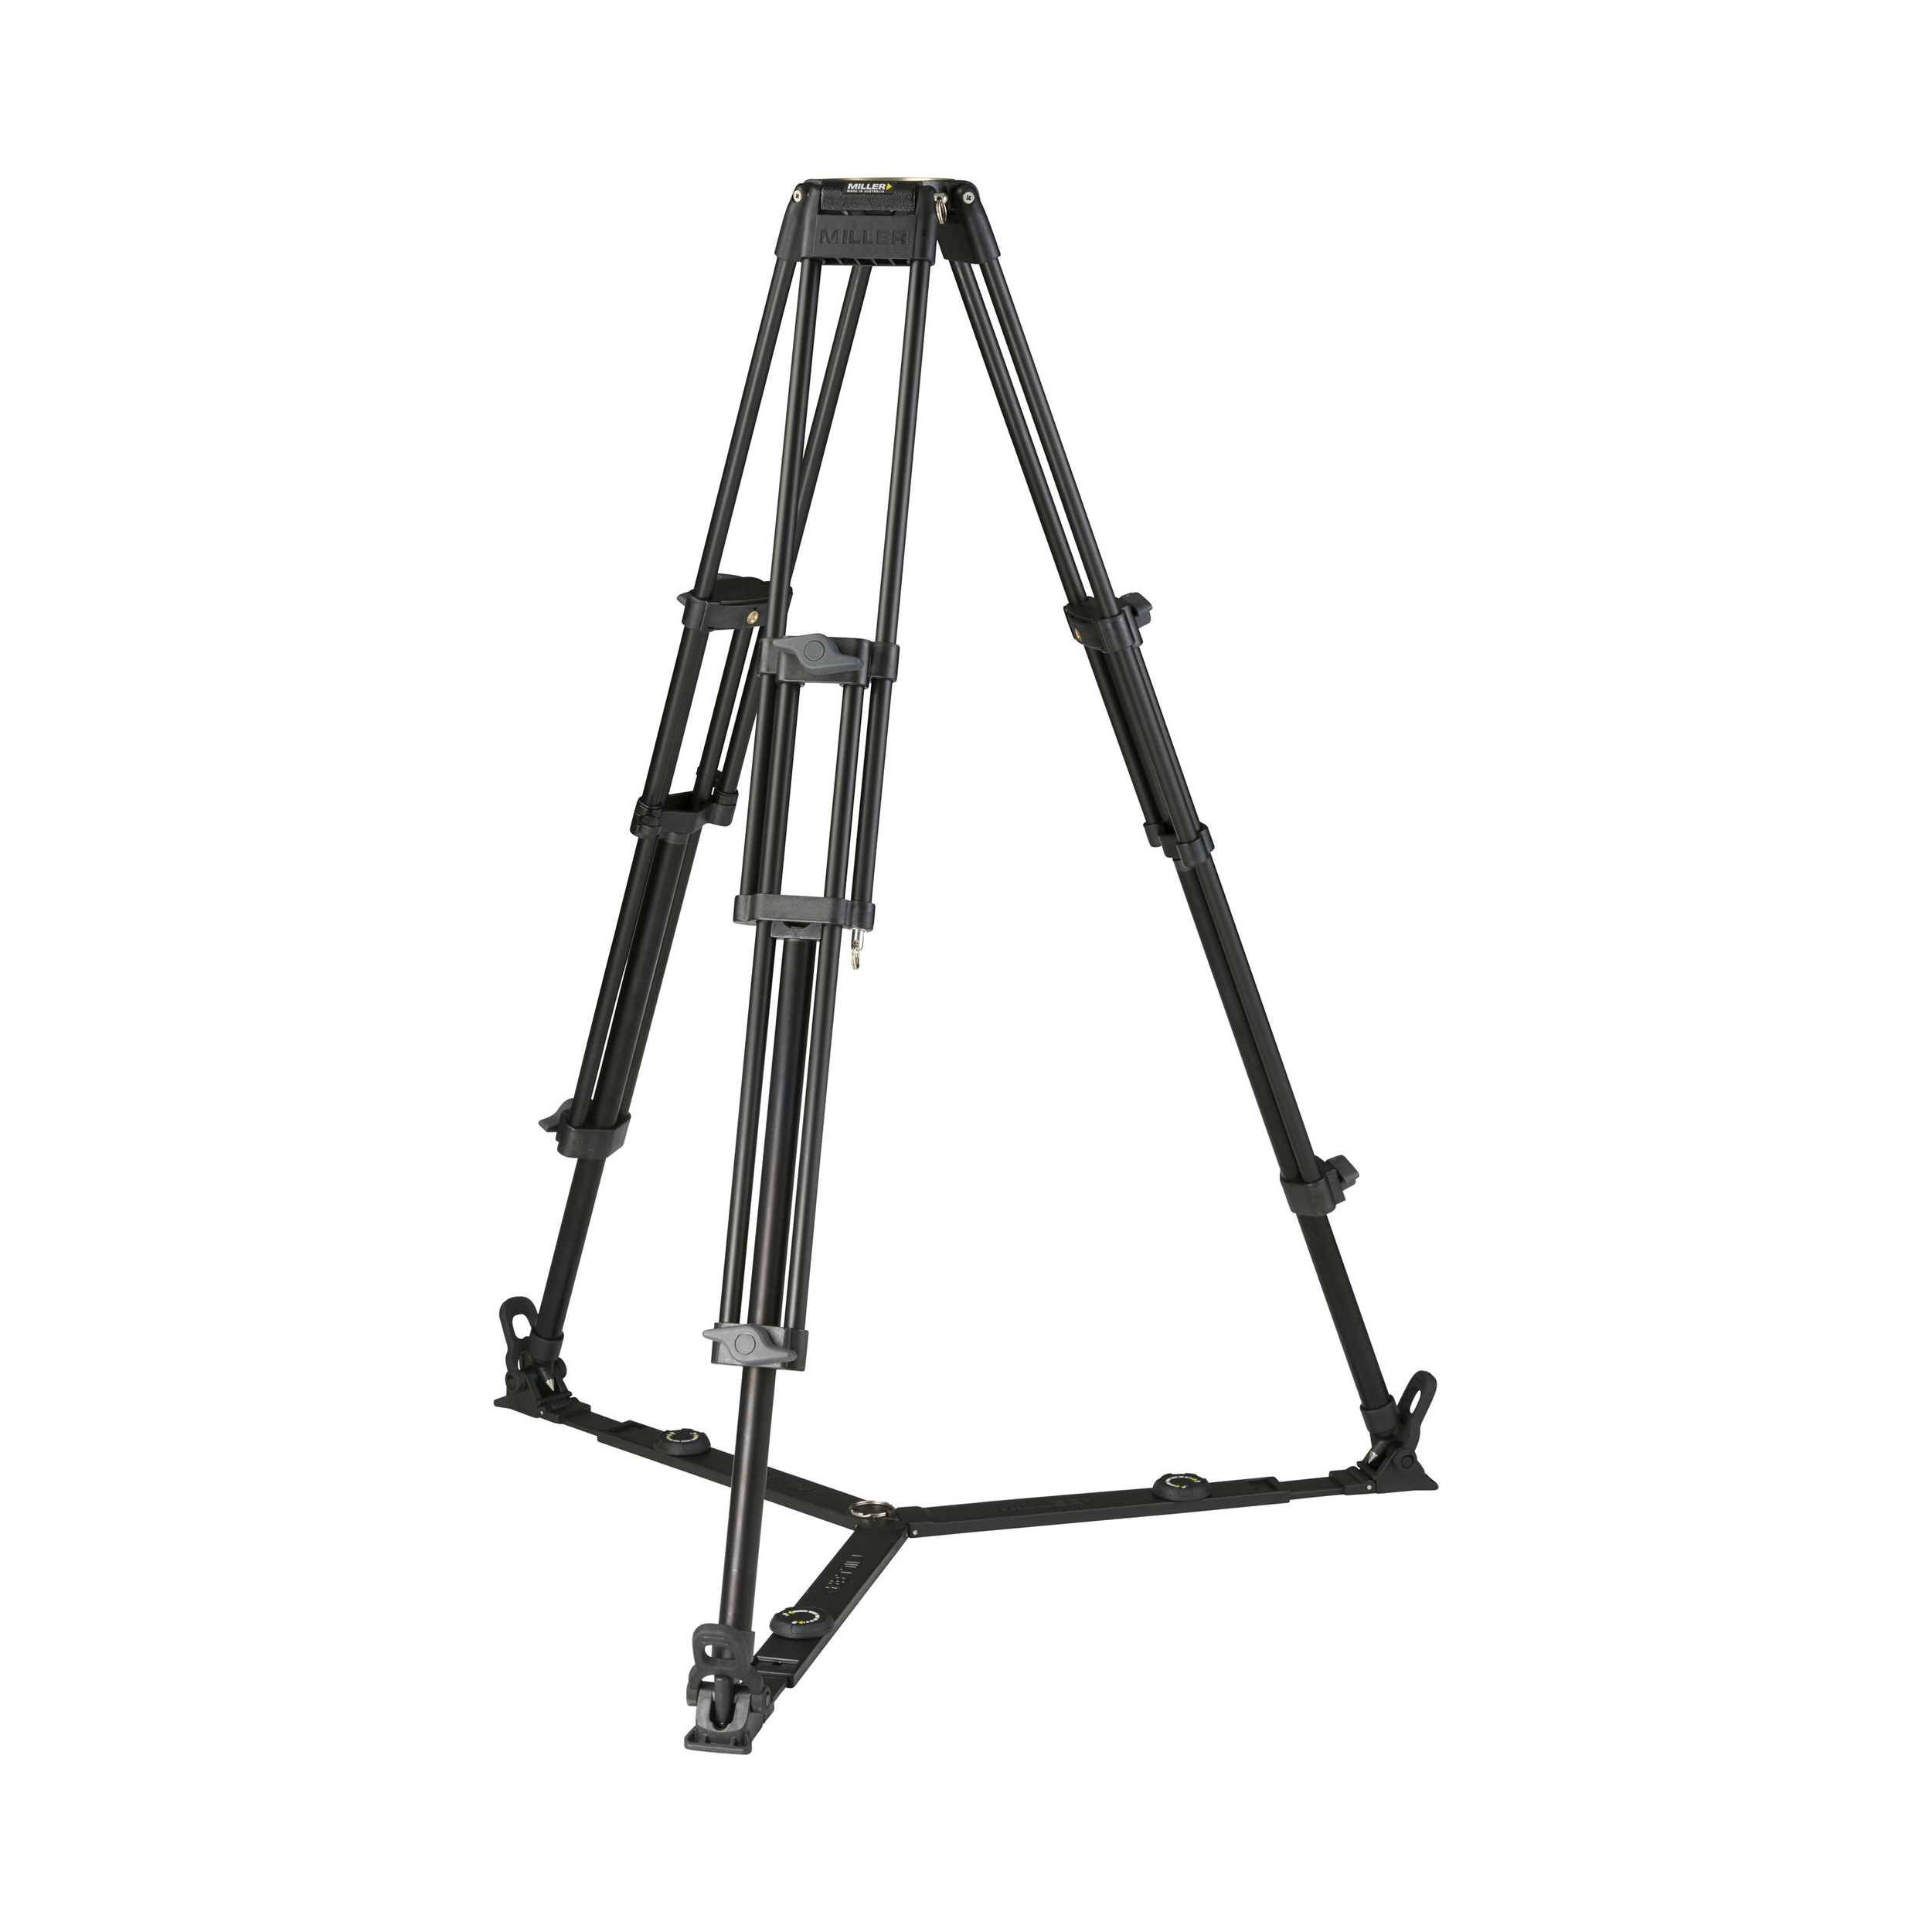 MILLER Toggle 2-St Alloy Tripod to suit 411 Ground Spreader